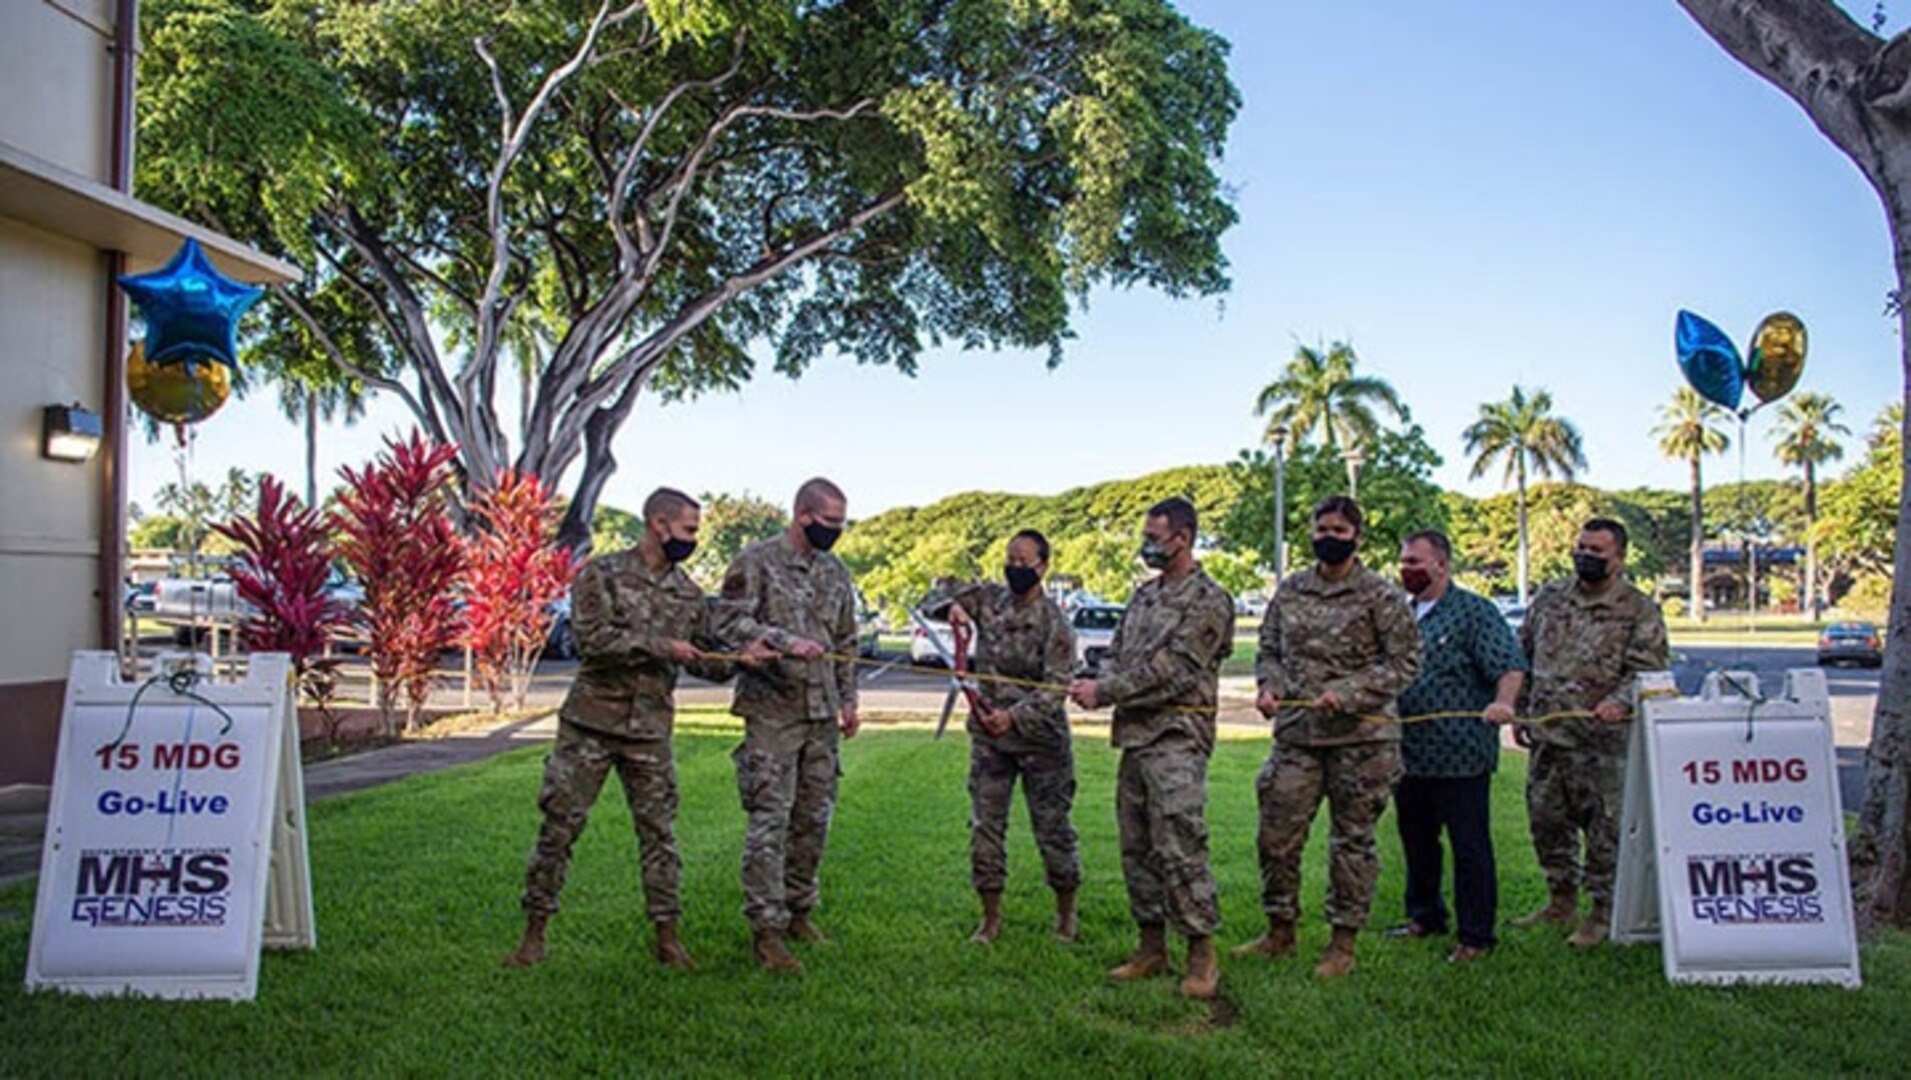 Air Force Col. Stephanie Ku, 15th Medical Group commander, cuts a cord with 15th MDG members and MHS GENESIS project integrators during the system’s launch ceremony at Joint Base Pearl Harbor-Hickam, Hawaii, in September (Photo by: Air Force Senior Airman Alan Ricker)